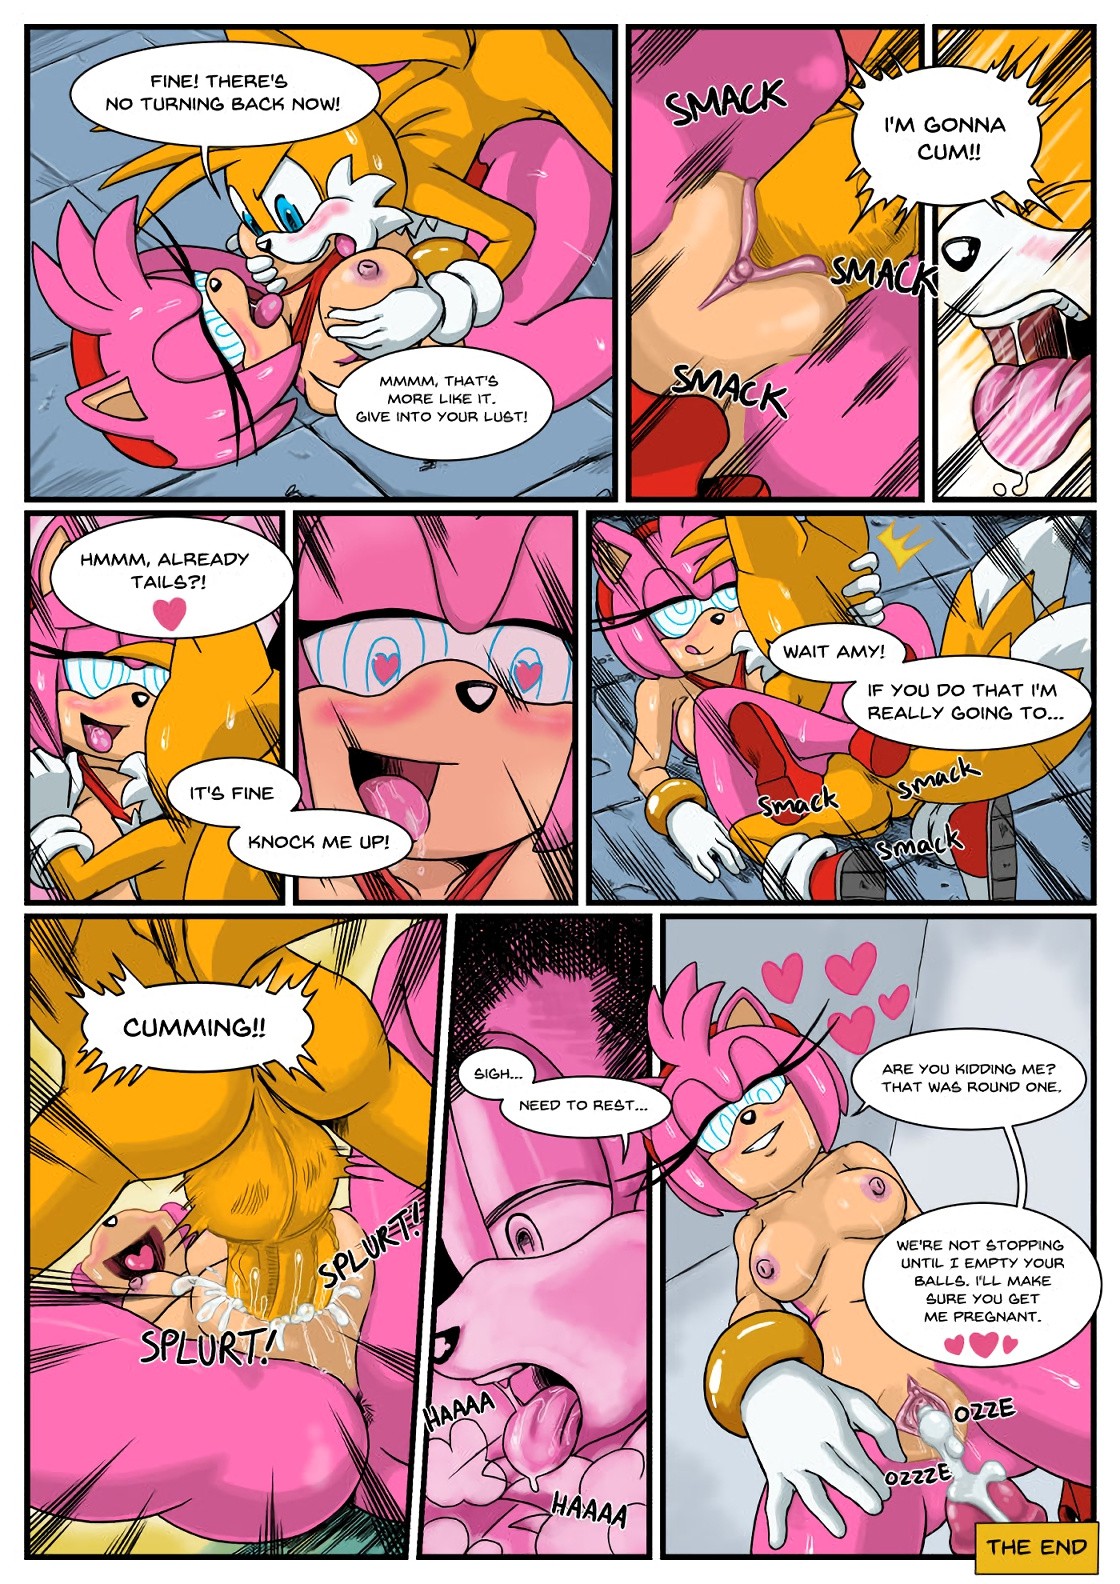 Malfunction porn comic picture 5